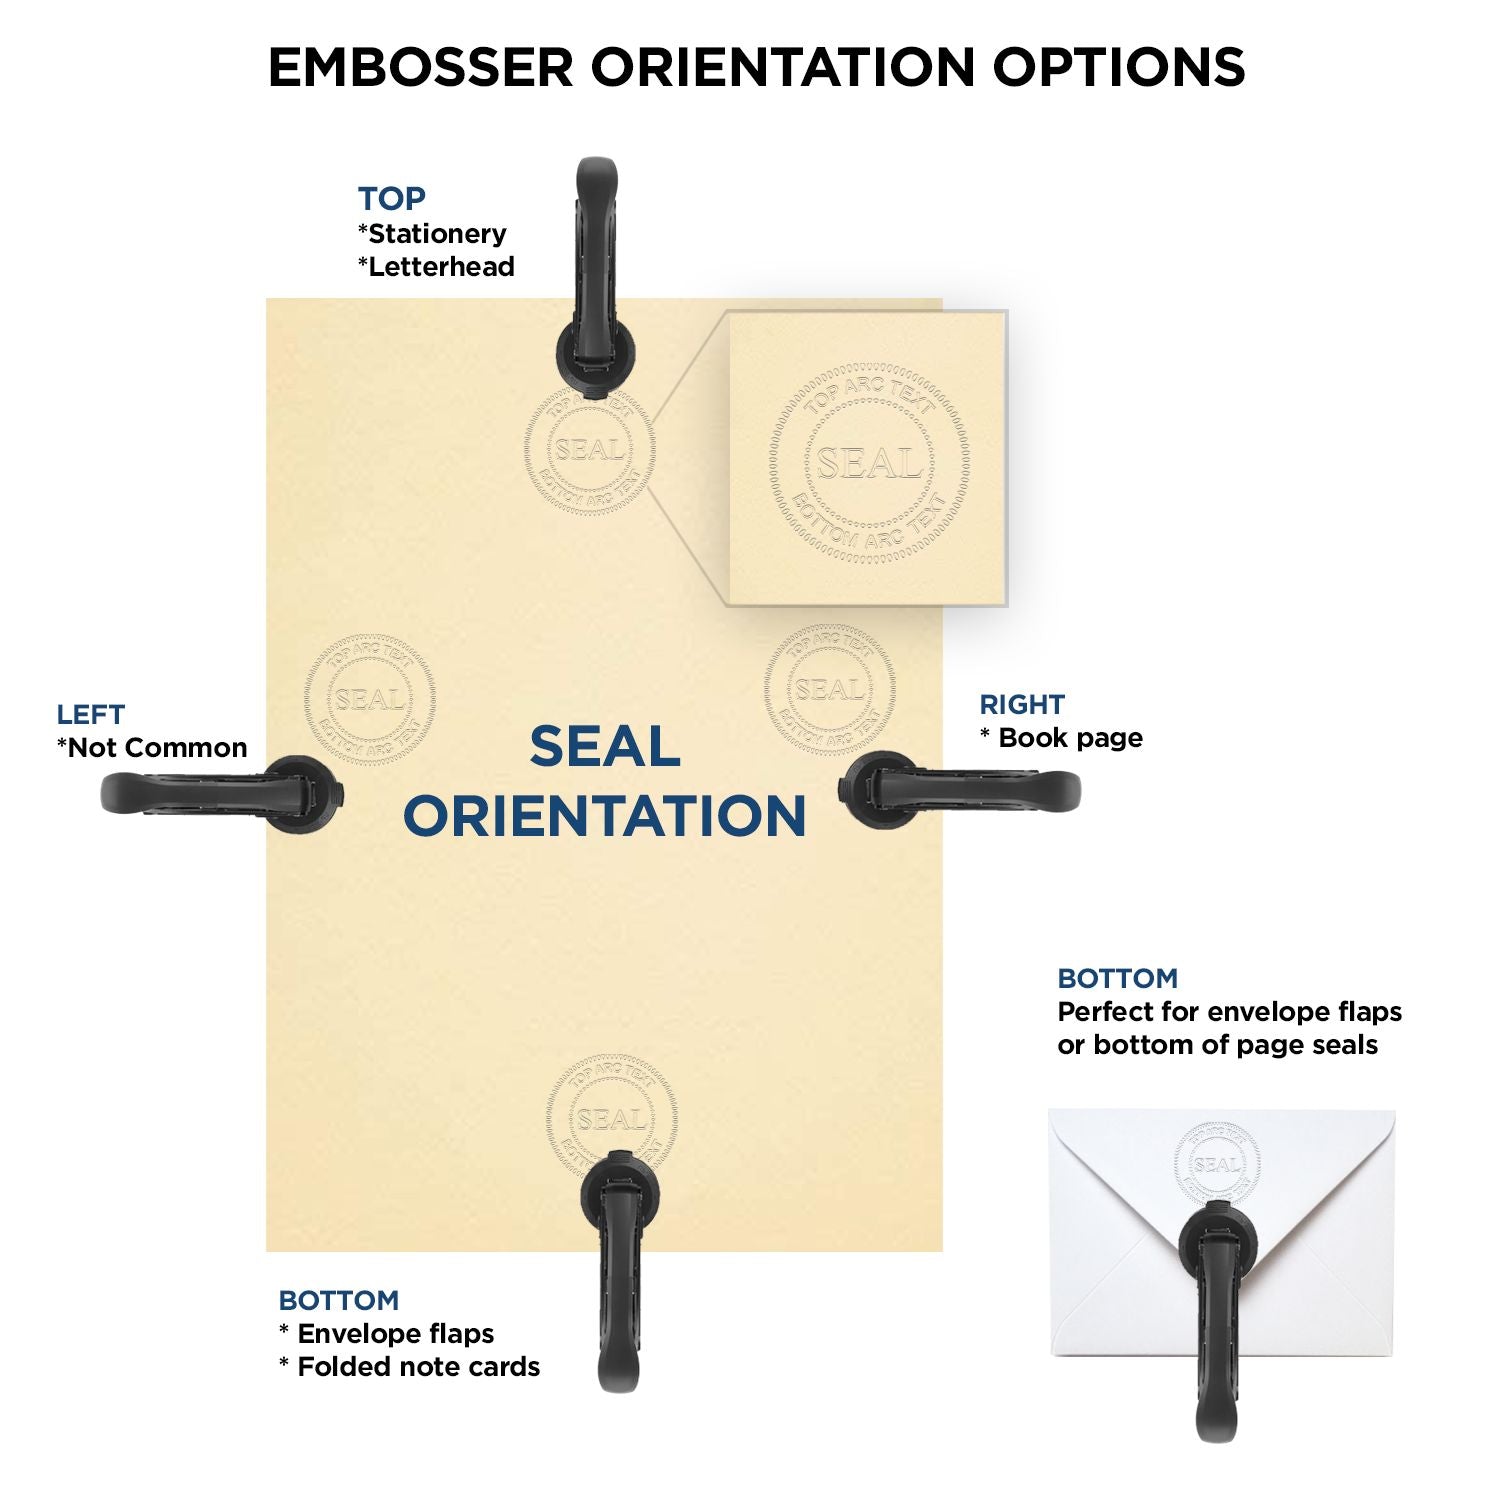 An infographic for the Heavy Duty Connecticut Landscape Architect Cast Iron Embosser showing embosser orientation, this is showing examples of a top, bottom, right and left insert.